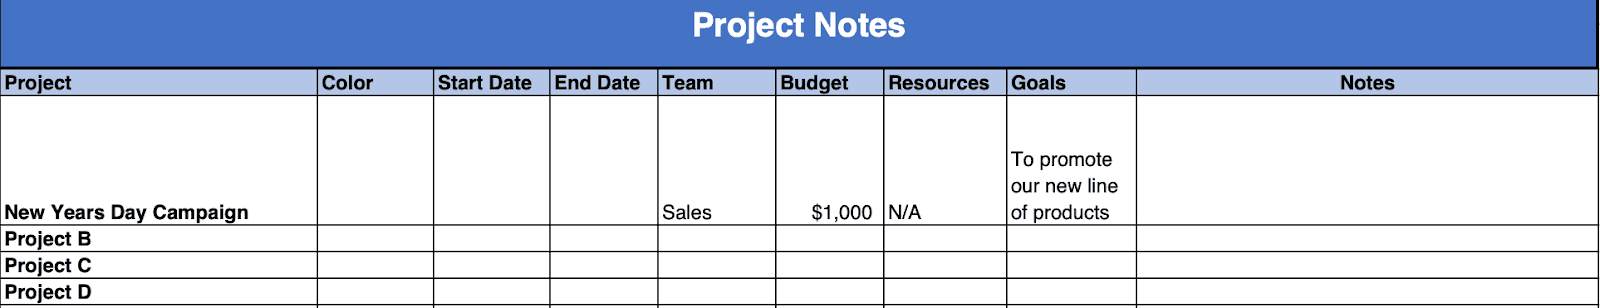 Project notes for a New Years campaign